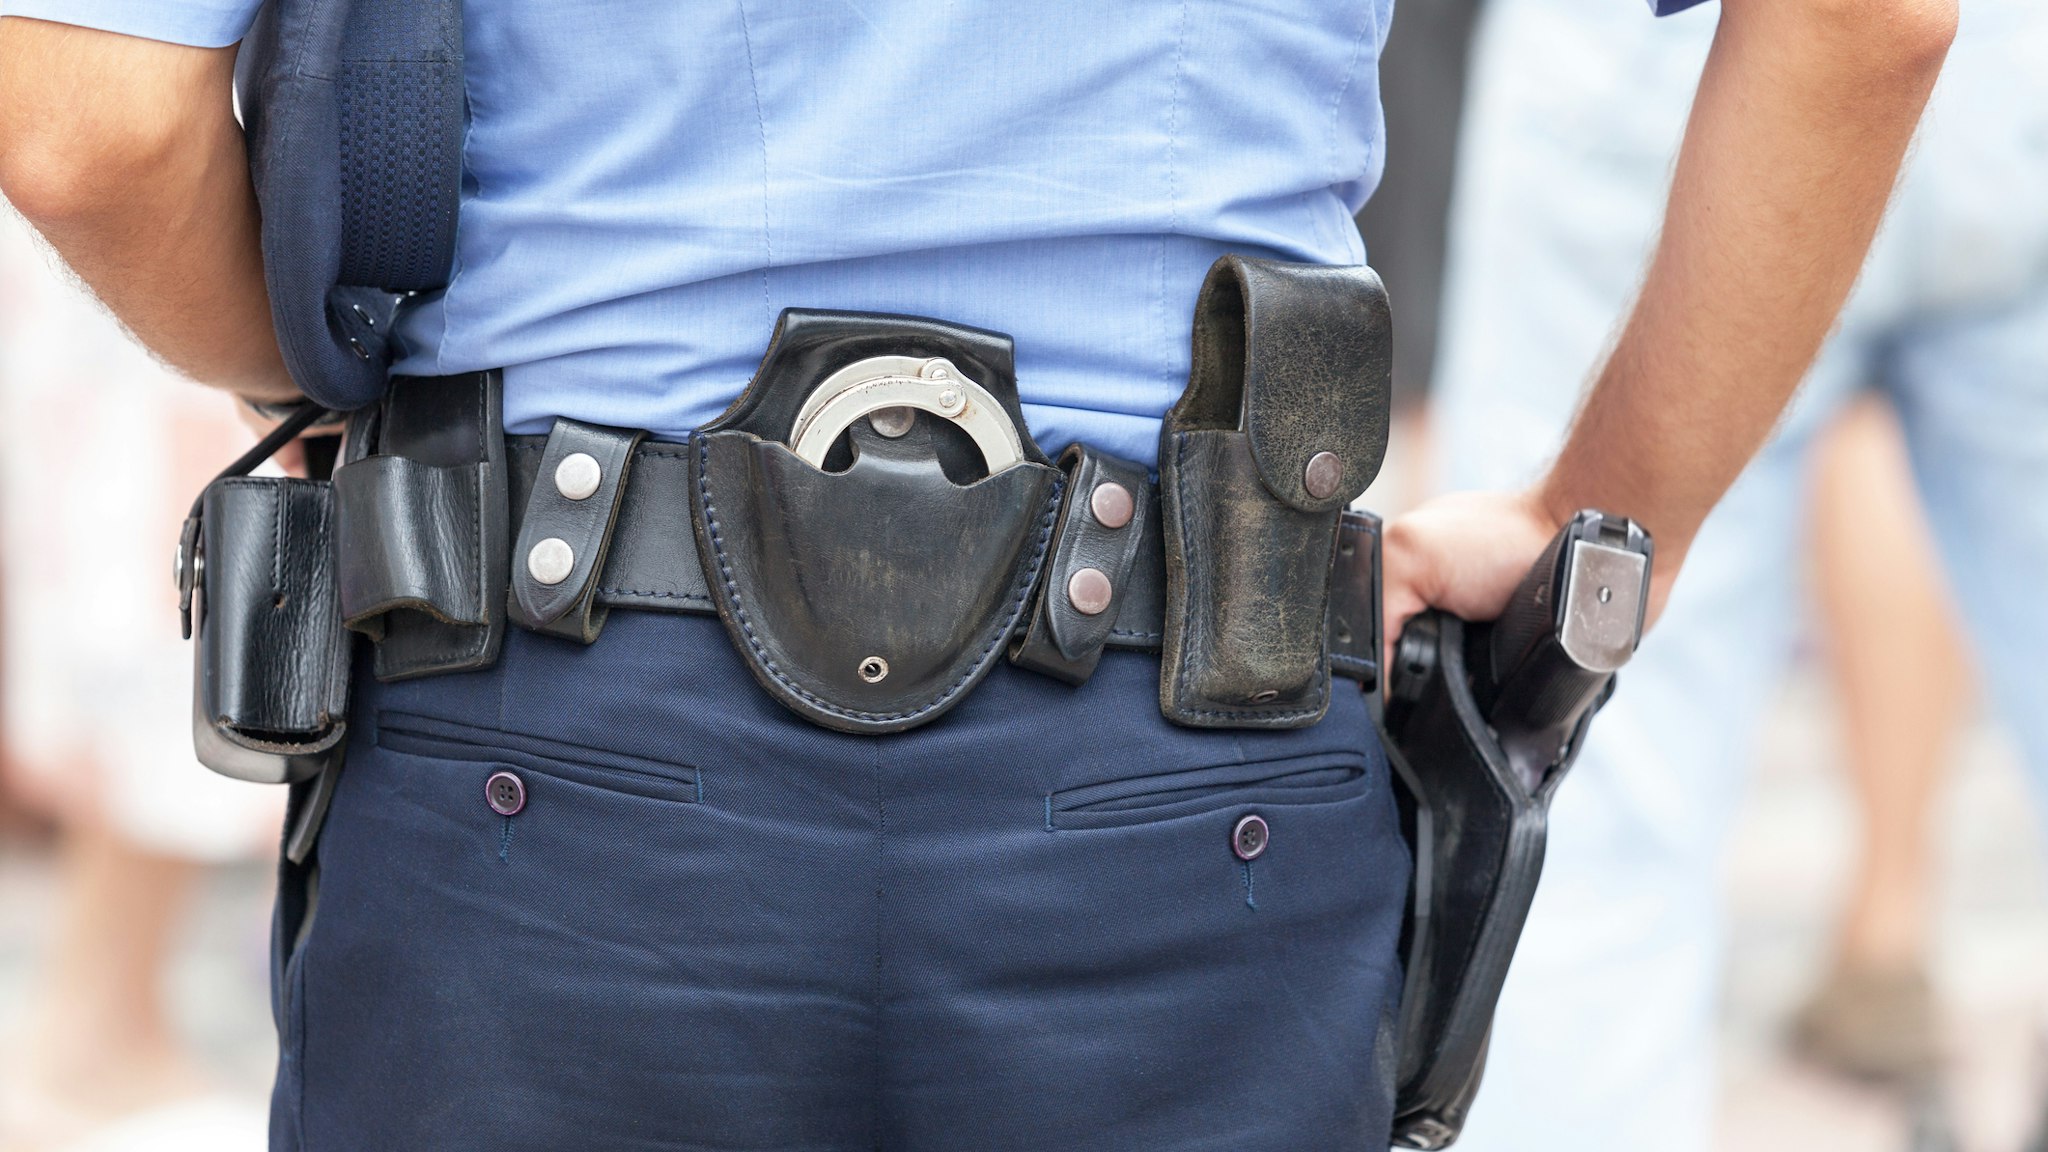 Midsection Rear View Of Police Man With Belt With Handcuffs And Gun - stock photo